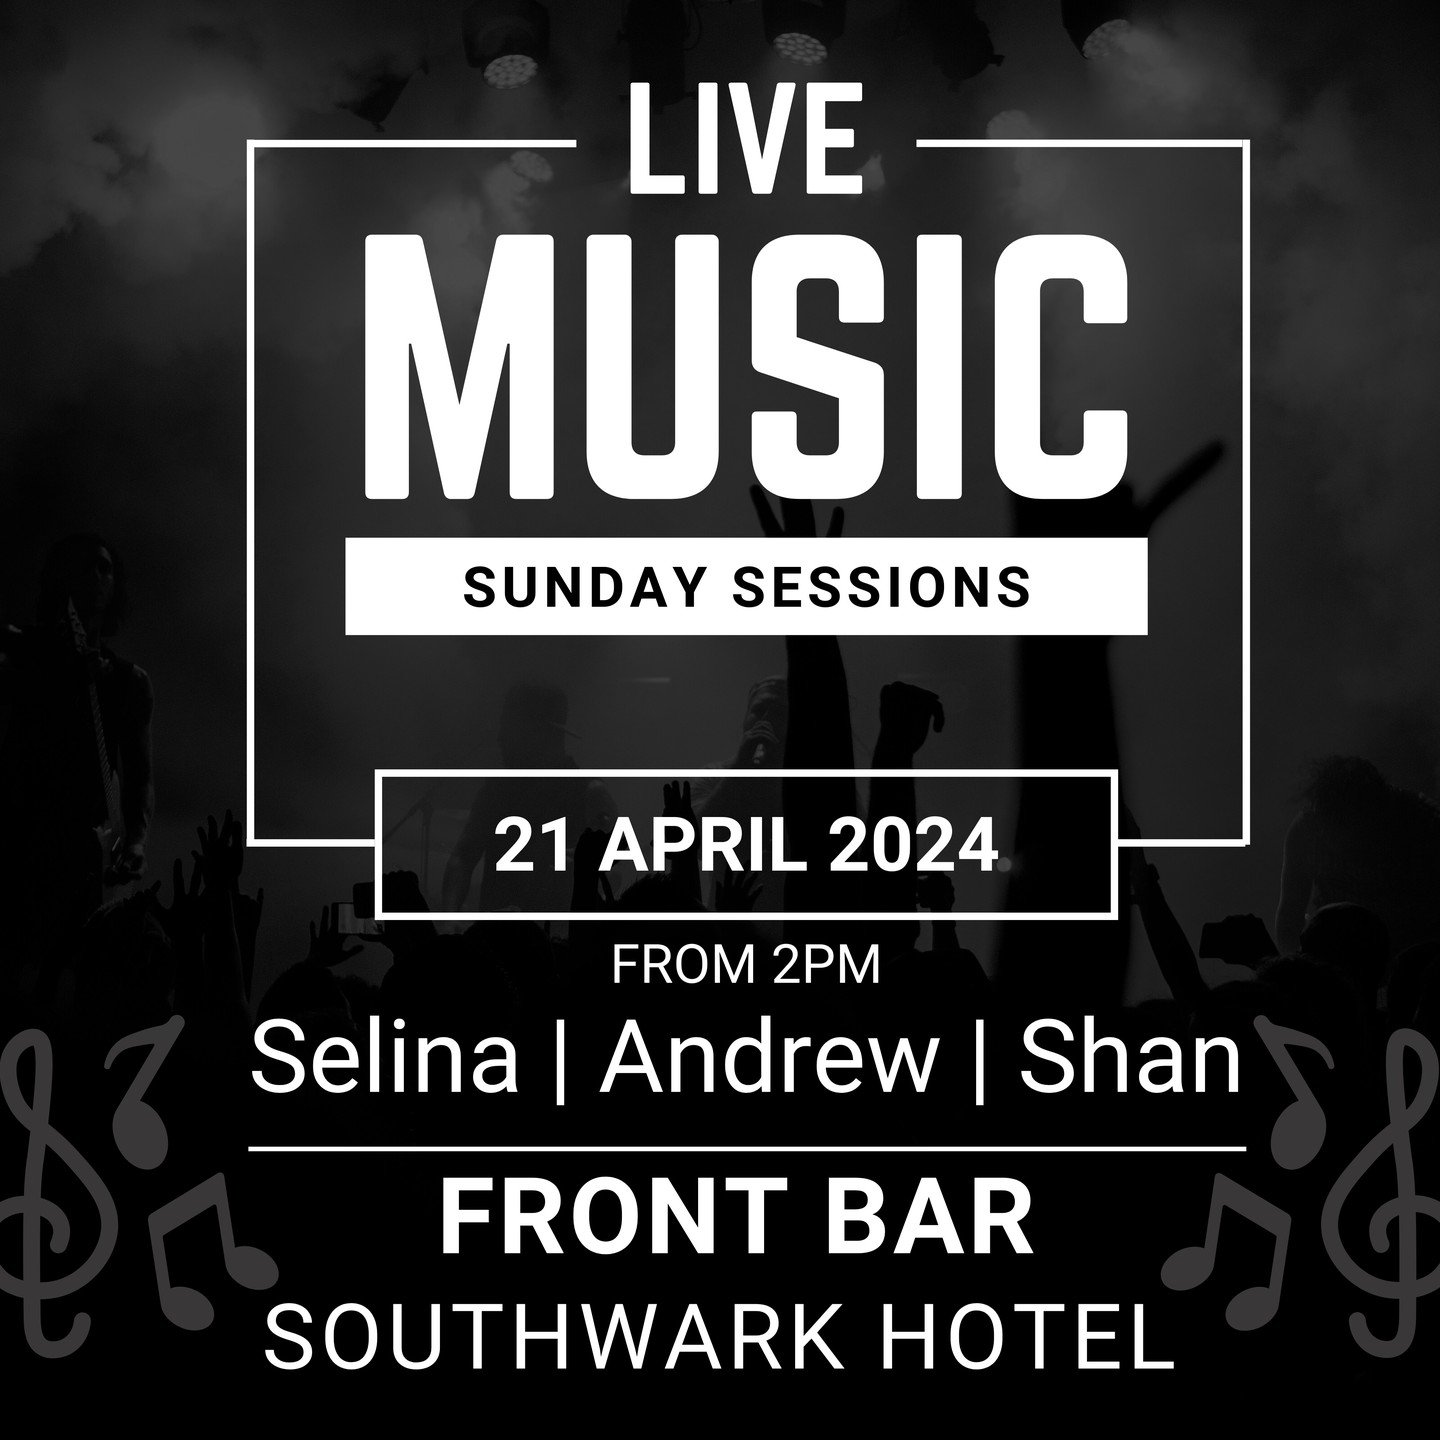 Love a Sunday Session. Live Music today with Selina, Andrew &amp; Shan from 2pm. What a great way to round out the weekend.

#southwarkhotel #southwarkpub #pibs #pubsofadelaide #localpub #supportyourlocal #familyrun #livemusic #music #acousticmusic #